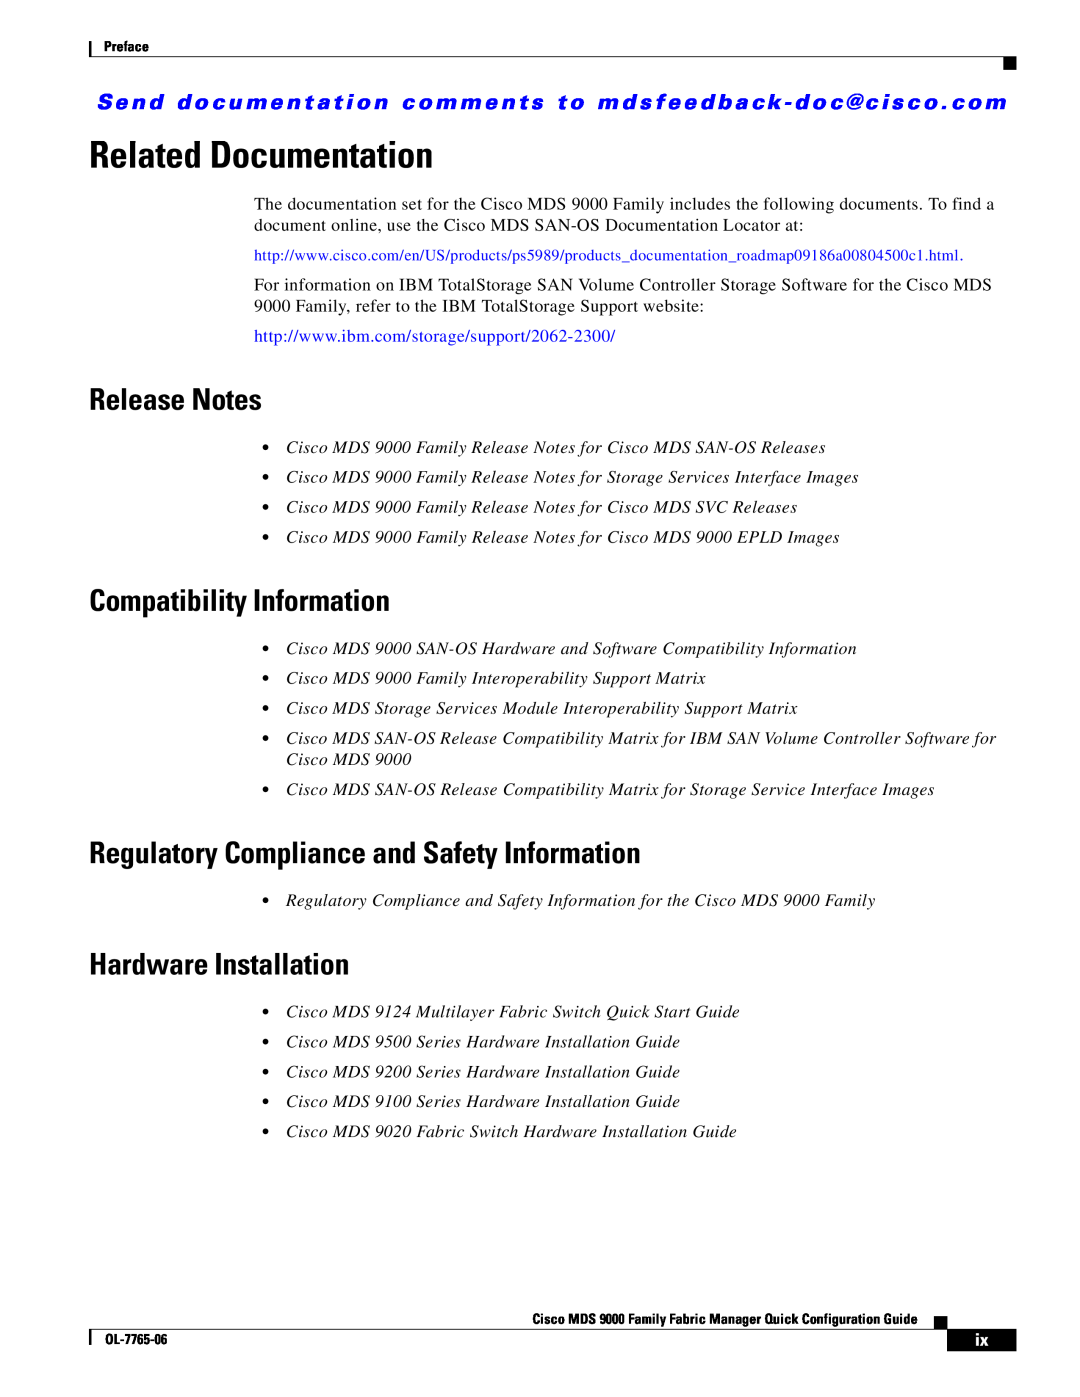 Cisco Systems MDS 9000 appendix Related Documentation, Release Notes, Compatibility Information, Hardware Installation 